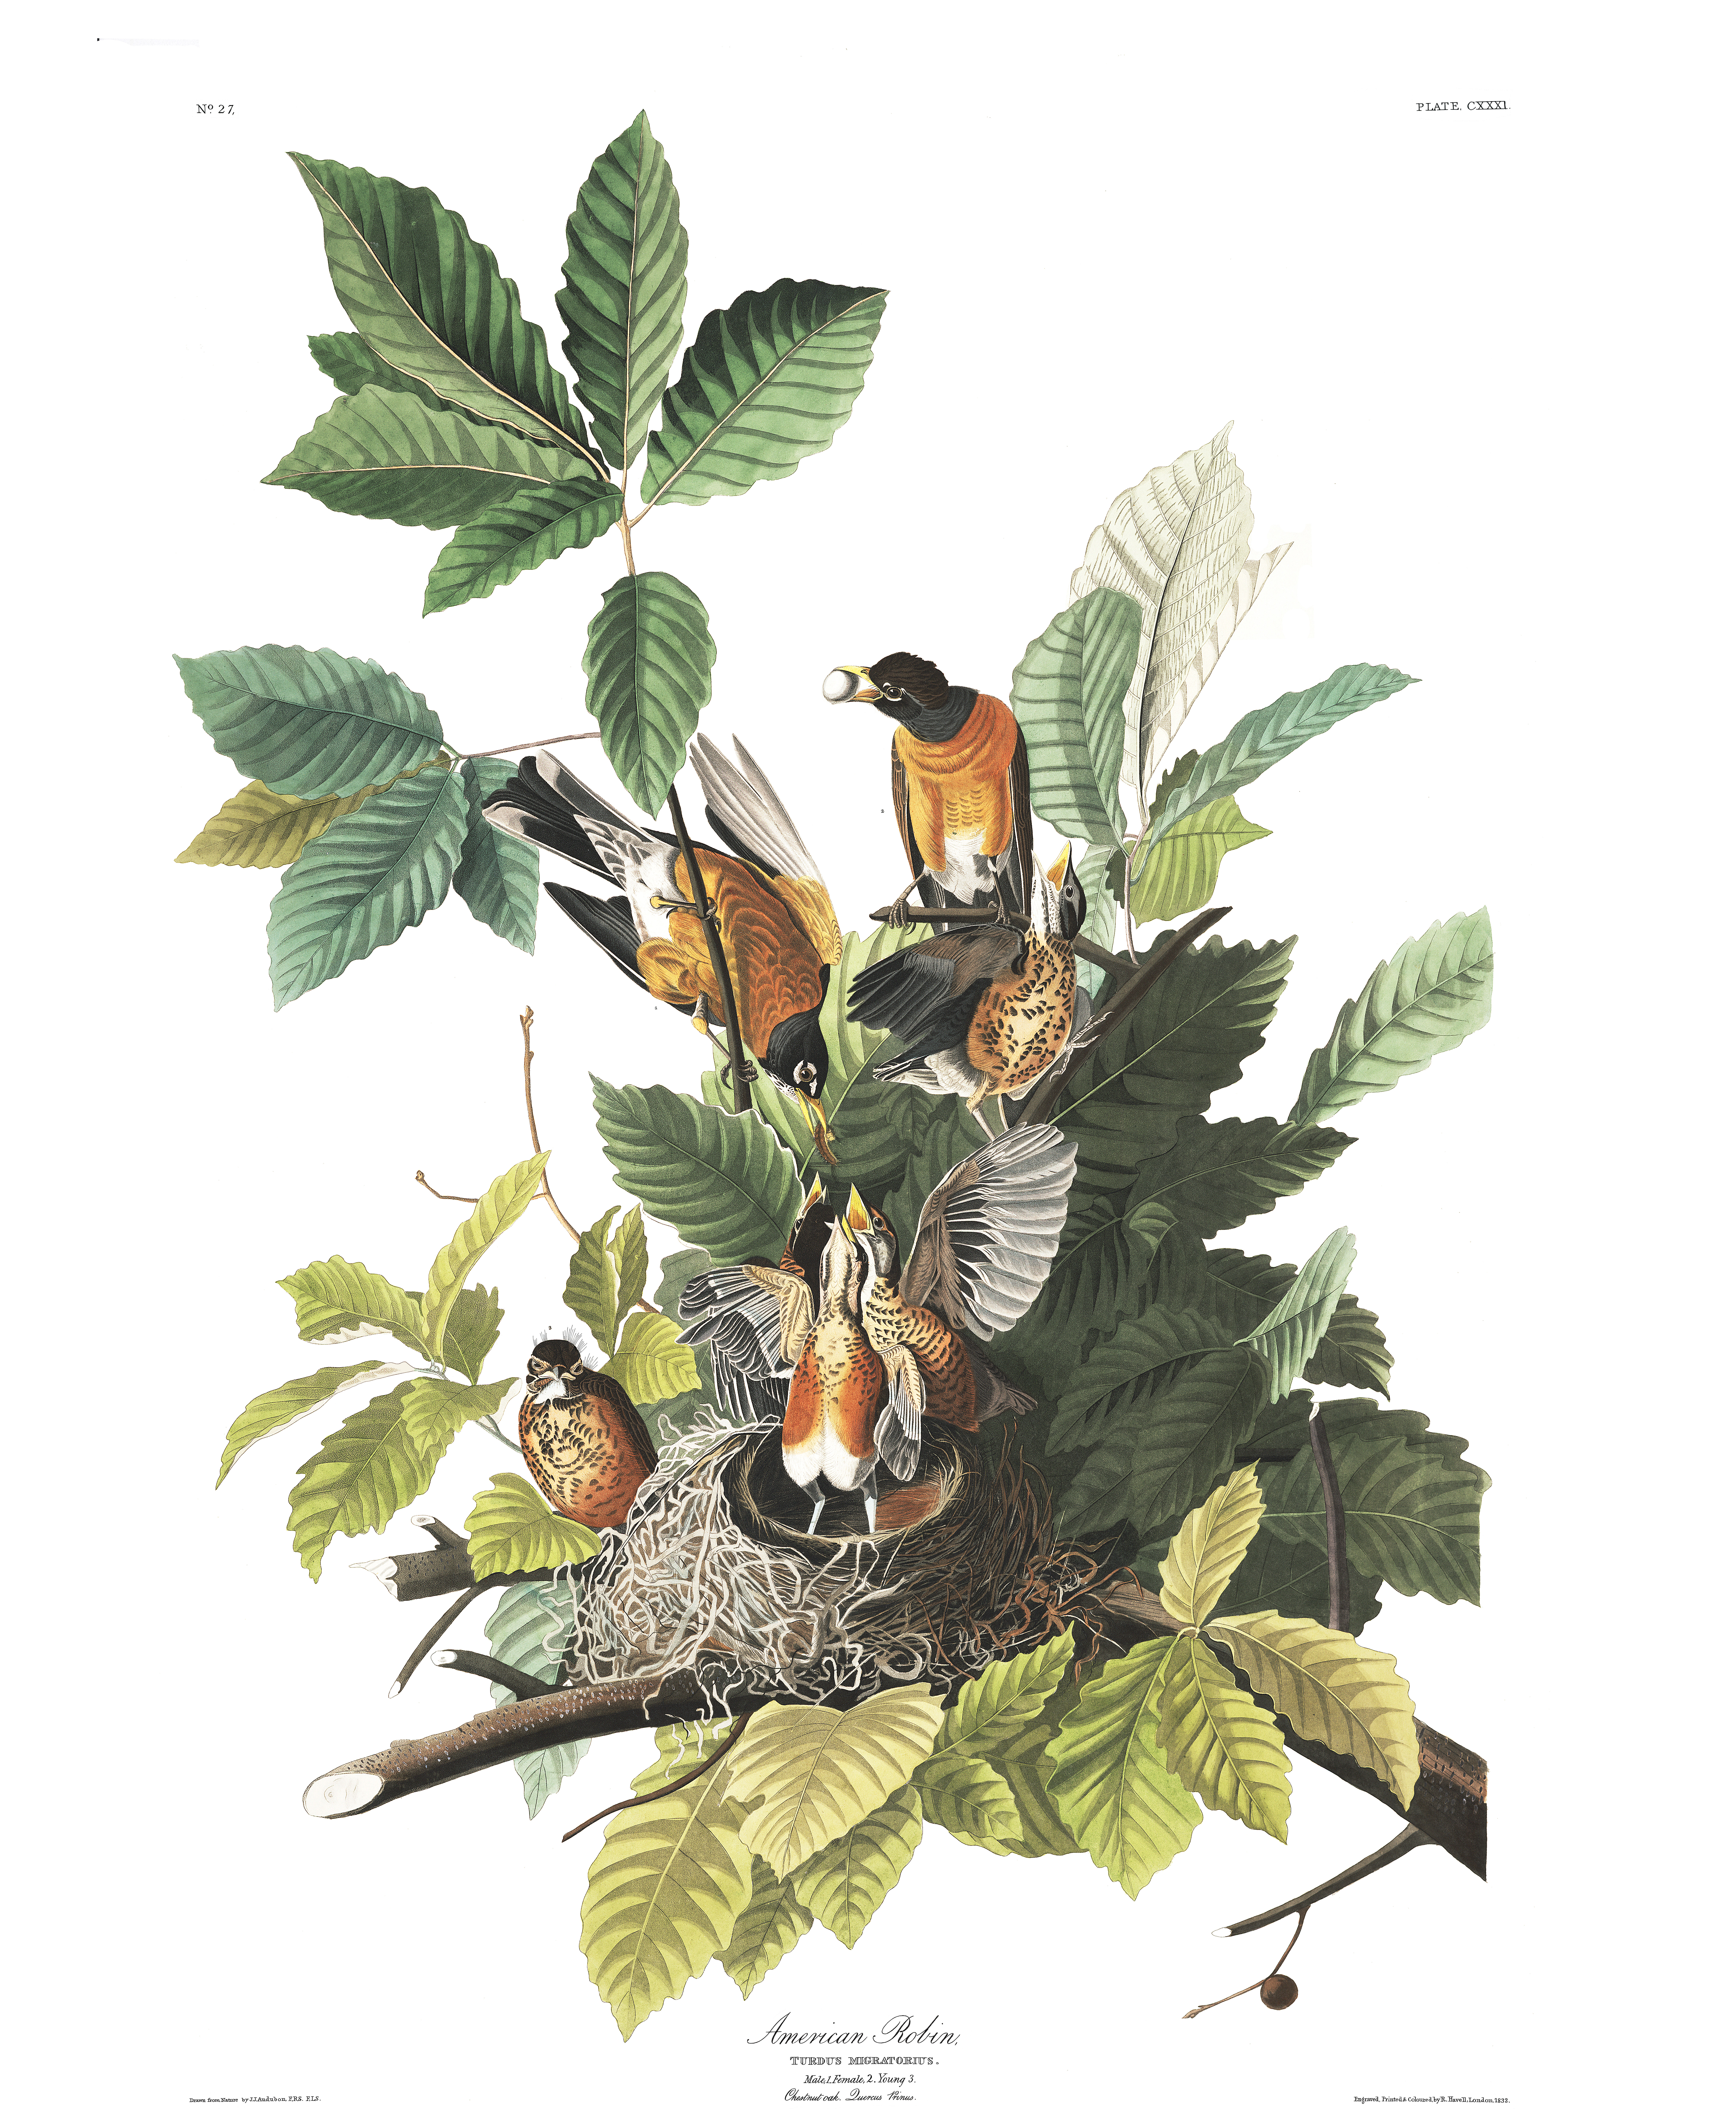 Plate 131 of the American Robin